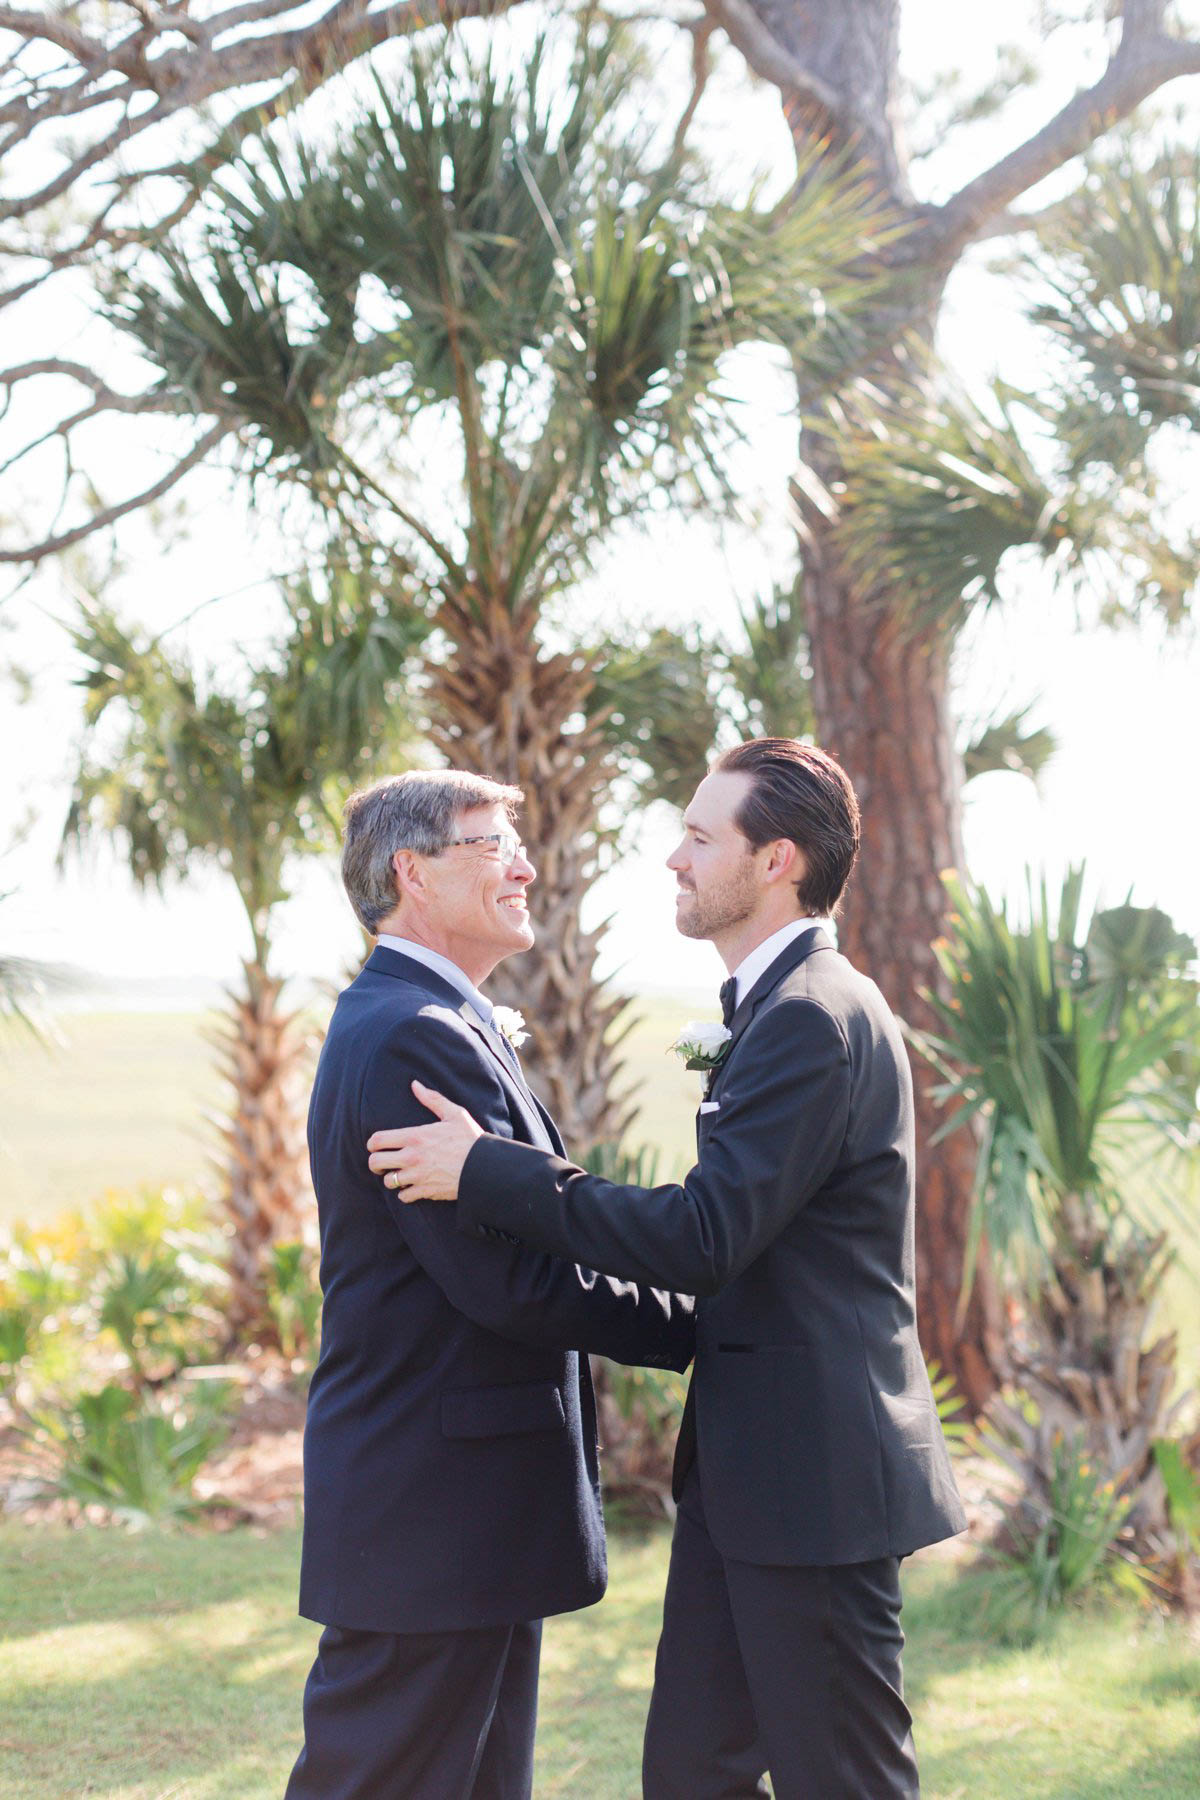 Groom and Father of Groom exchange hug before seeing bride down the island